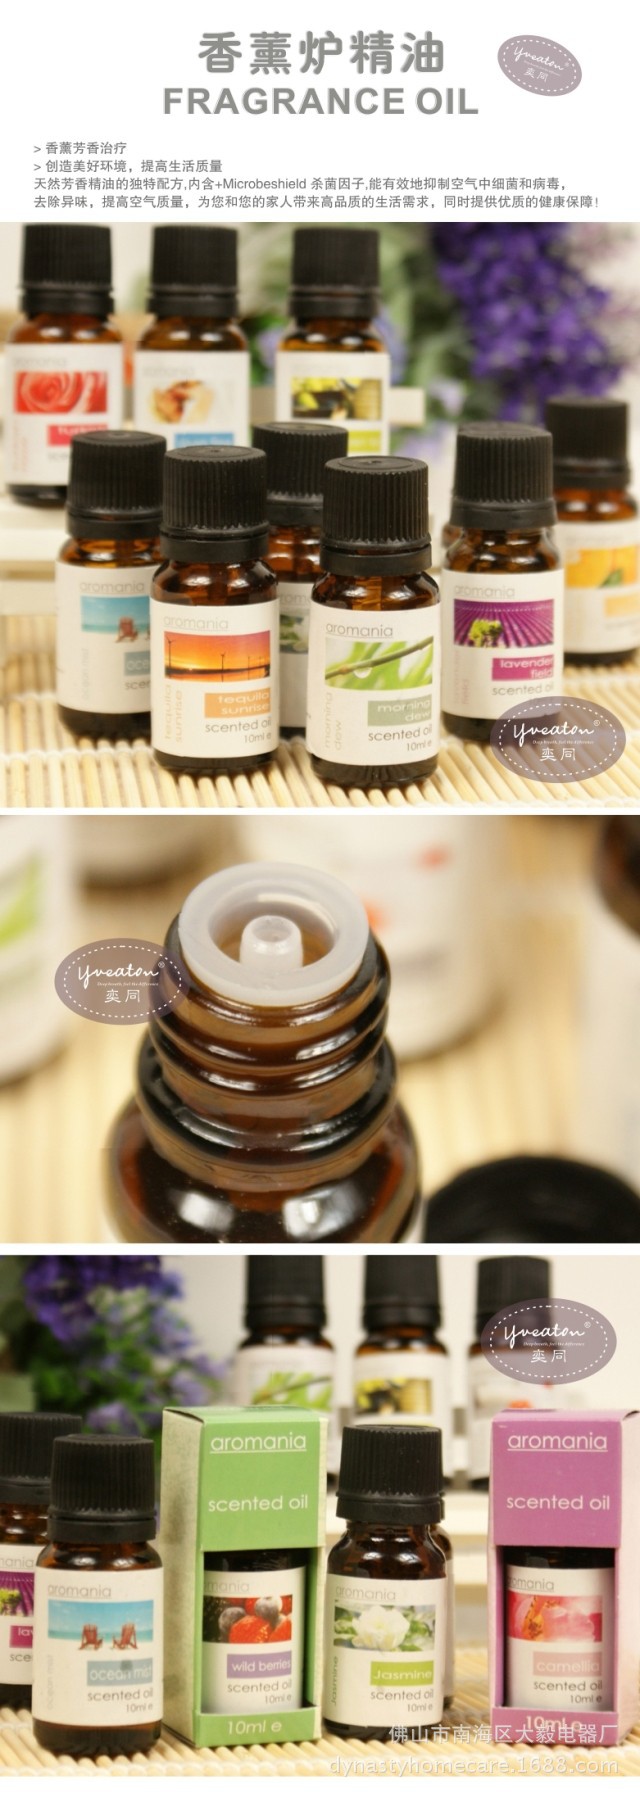 Wholesale supply of 17B hotel room free aromatherapy essential oil 30ML pure natural plant aromatic essential oil2